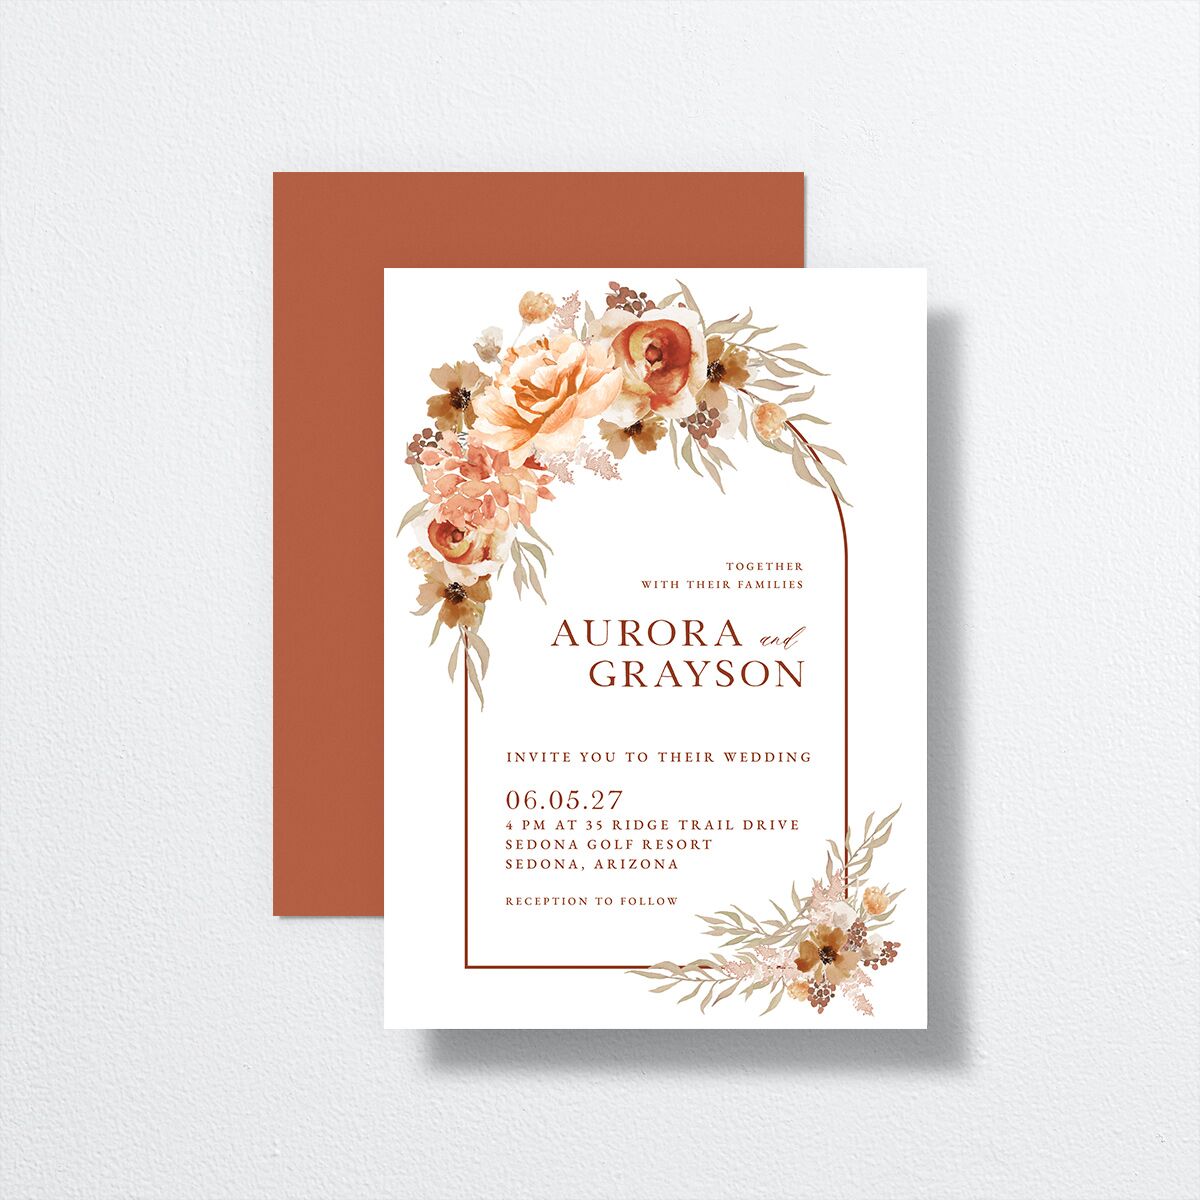 Bohemian Arch Wedding Invitations front-and-back in orange